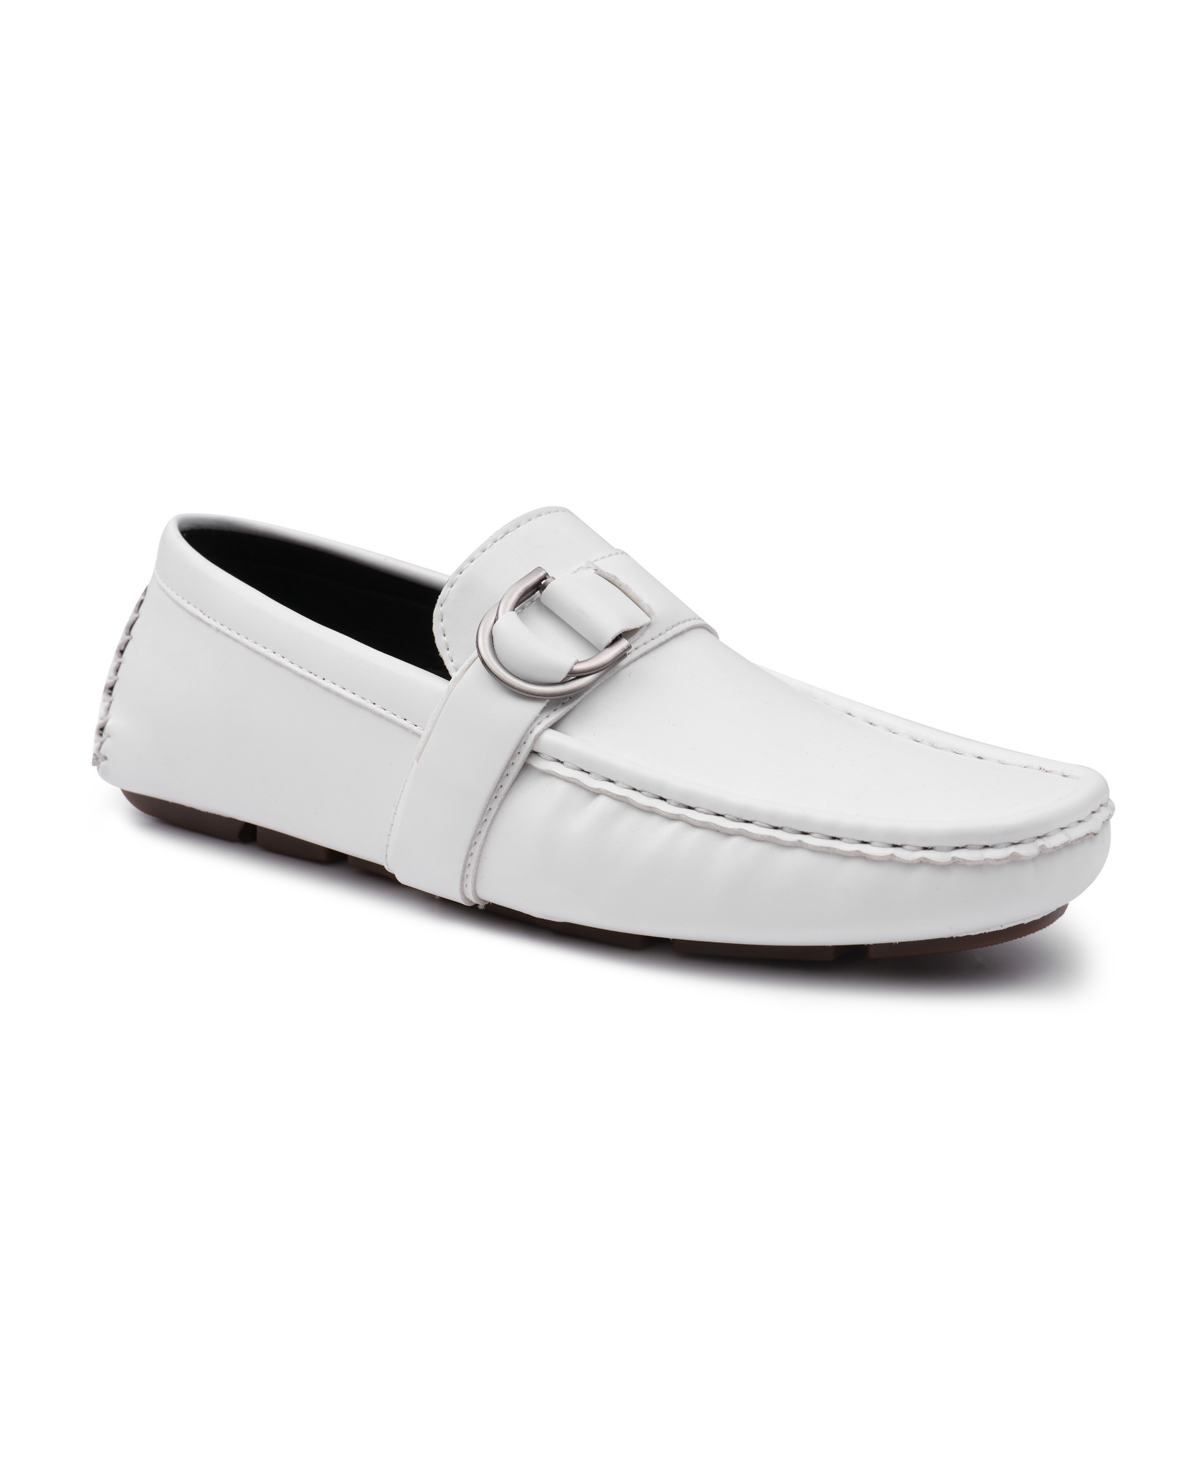 Men's Charter Side Buckle Loafers - Navy